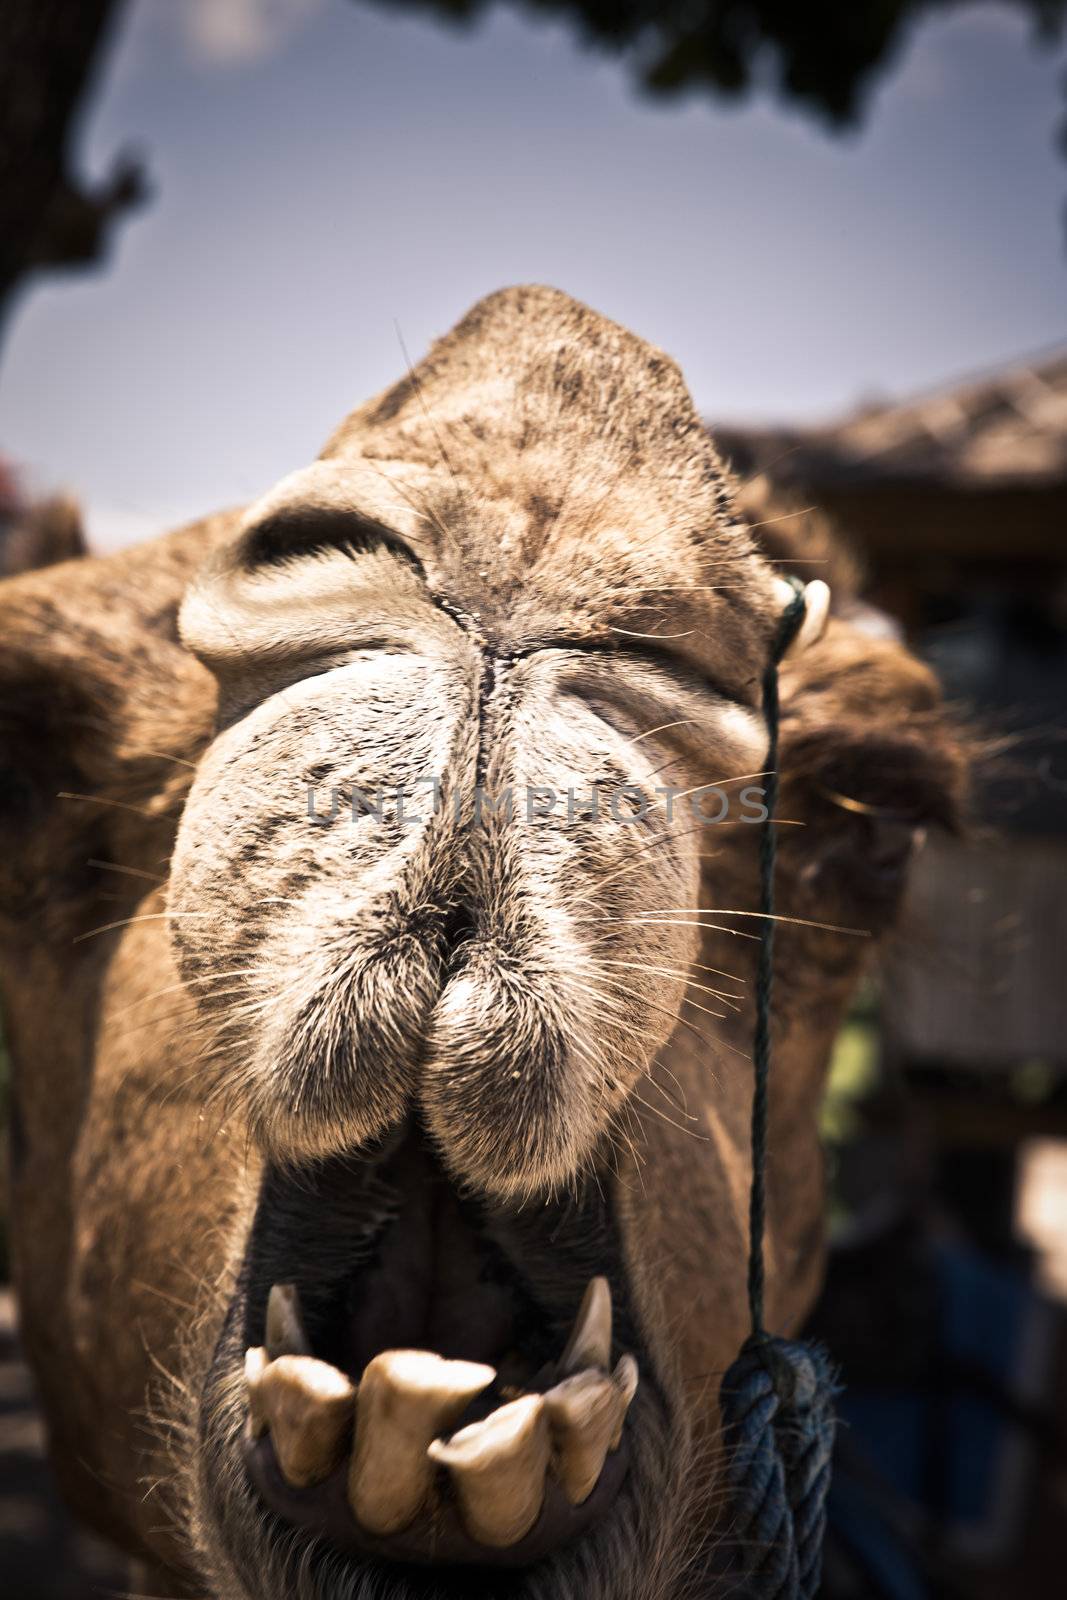 Closeup fun portrait of the face of a talkative camel with bad teeth eyeing out the camera